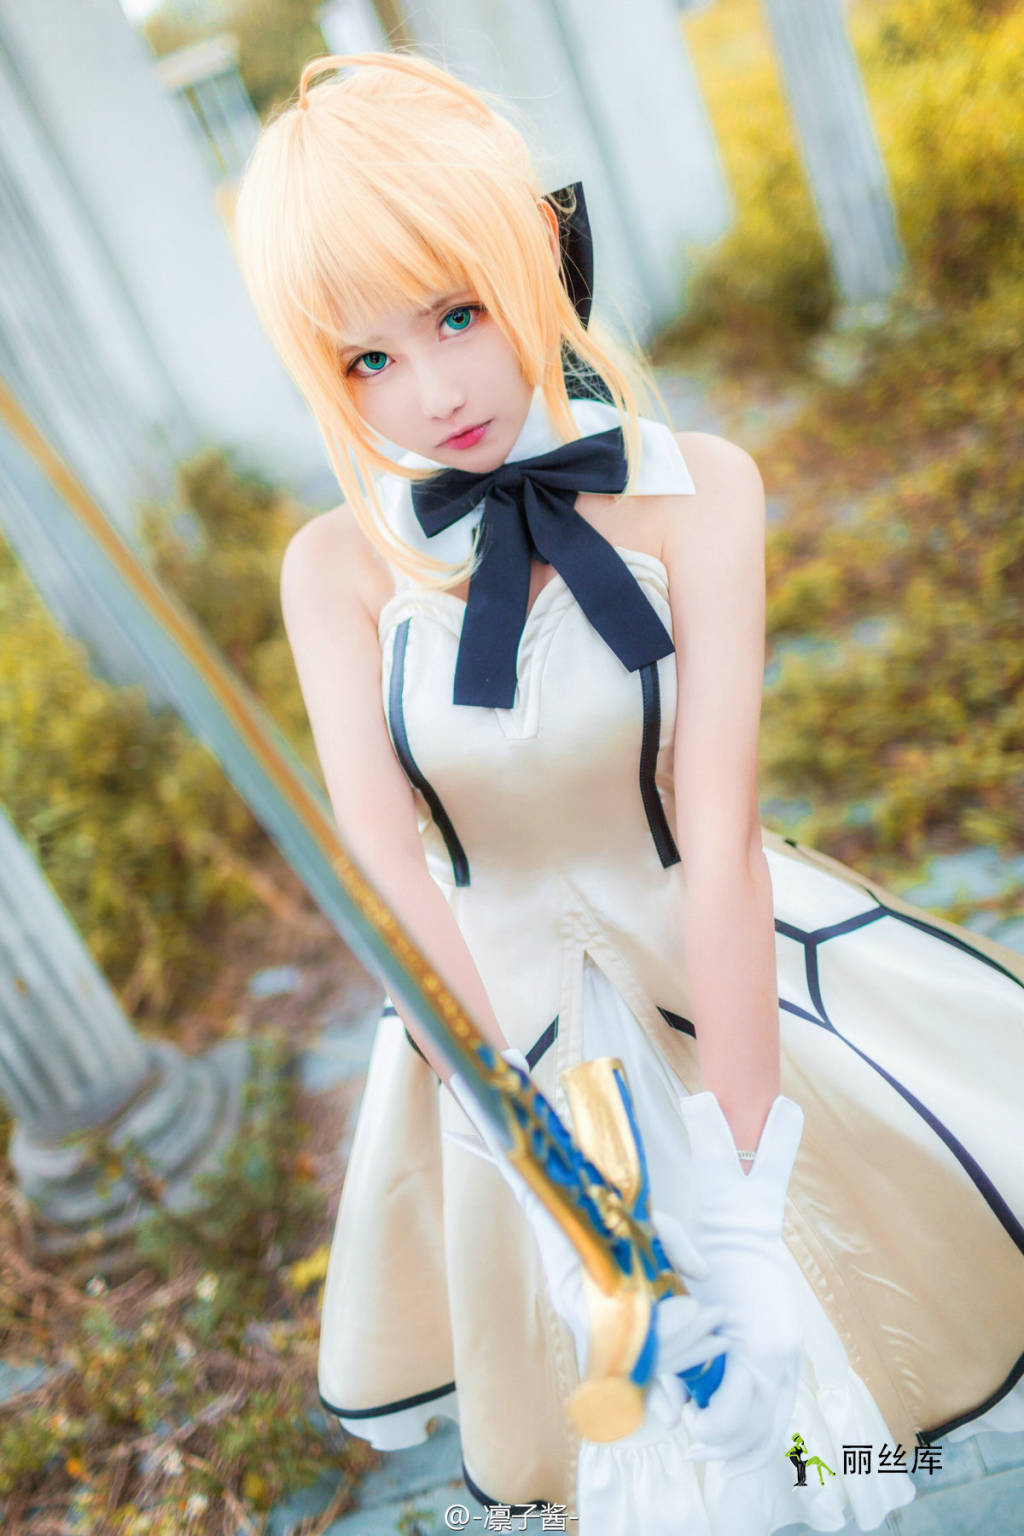 ӽ-saber lily_˿